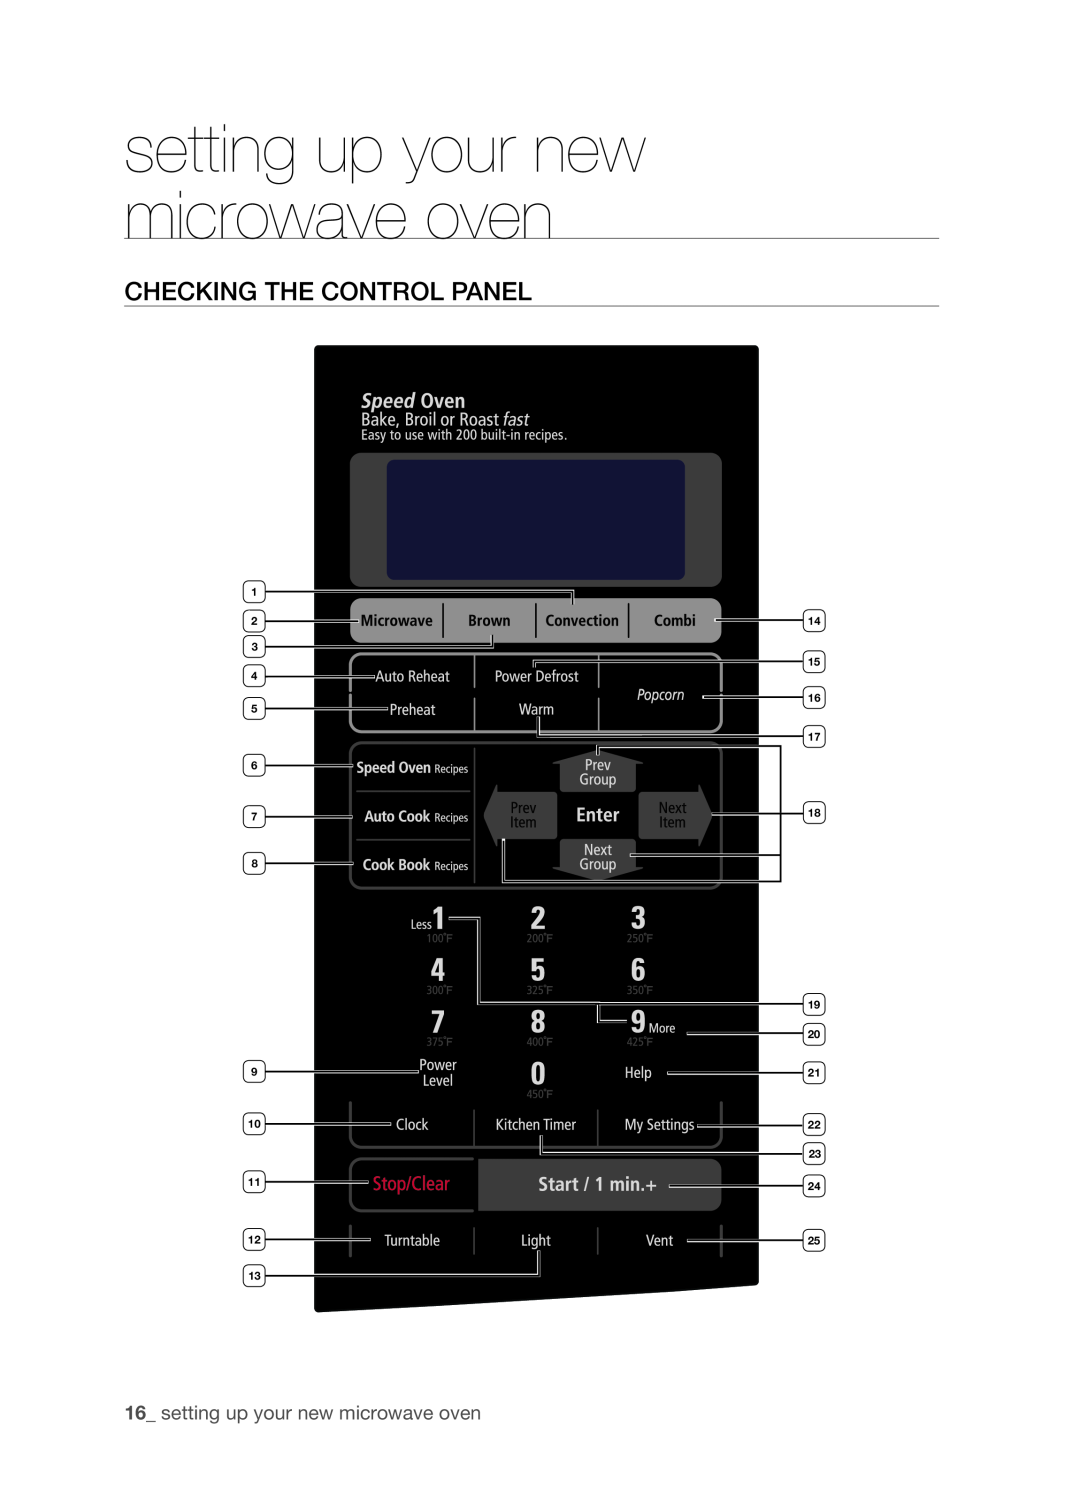 Samsung SMK9175ST user manual Checking the control panel, setting up your new microwave oven 